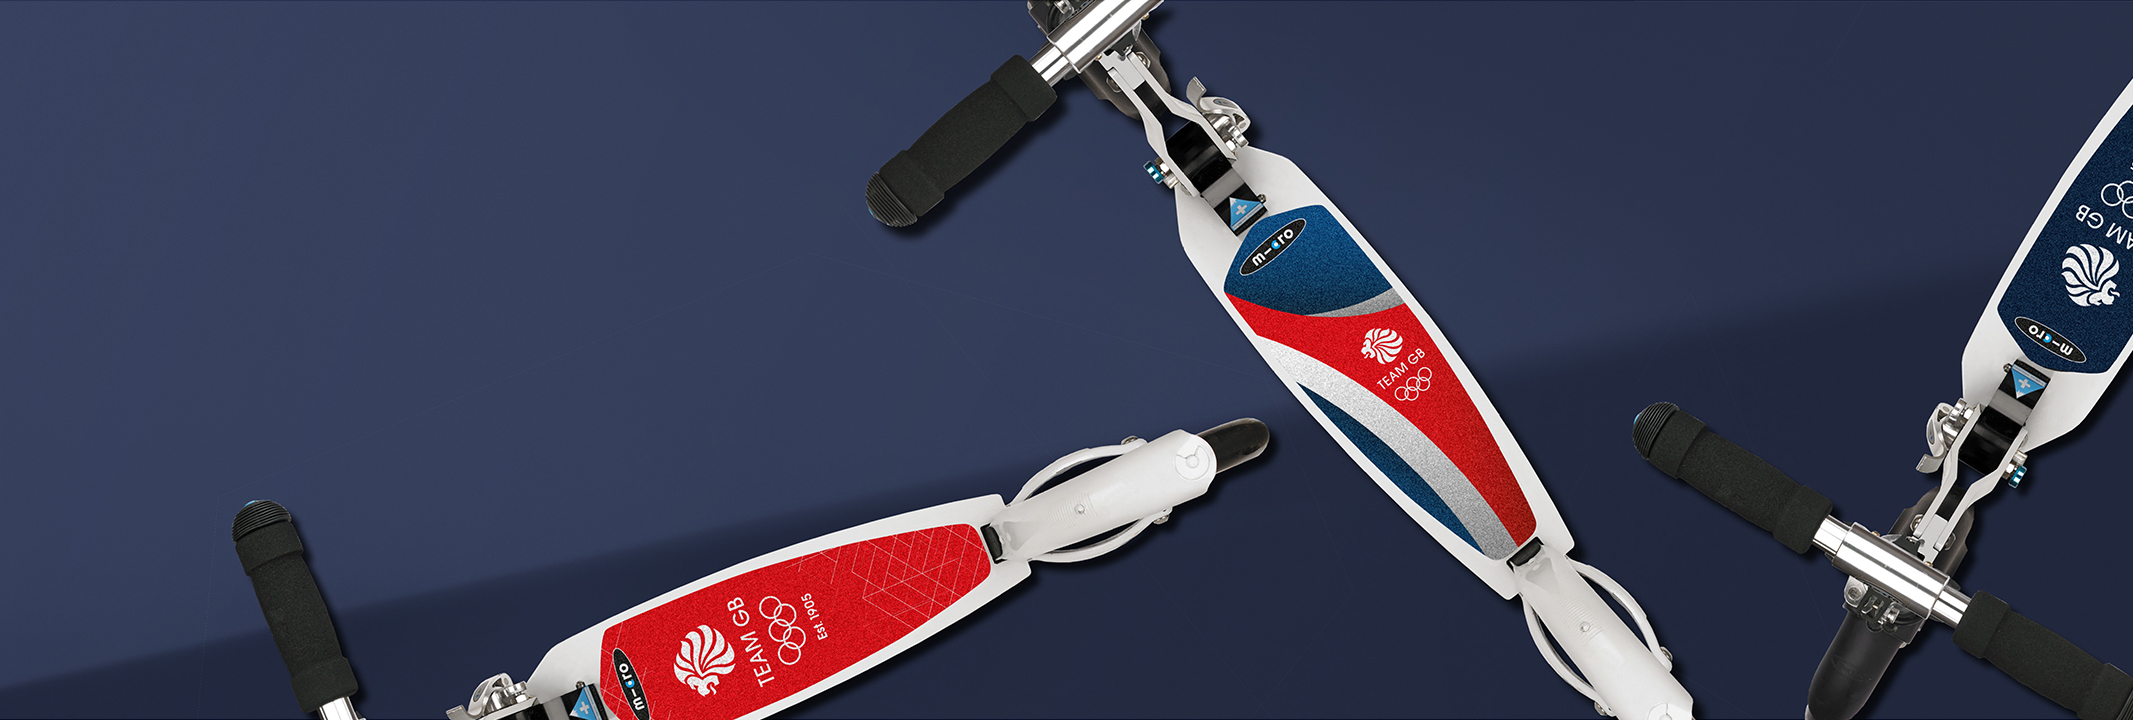 Read more about the article Team GB and Micro Scooters- Iconic brands join forces for the summer of sport!